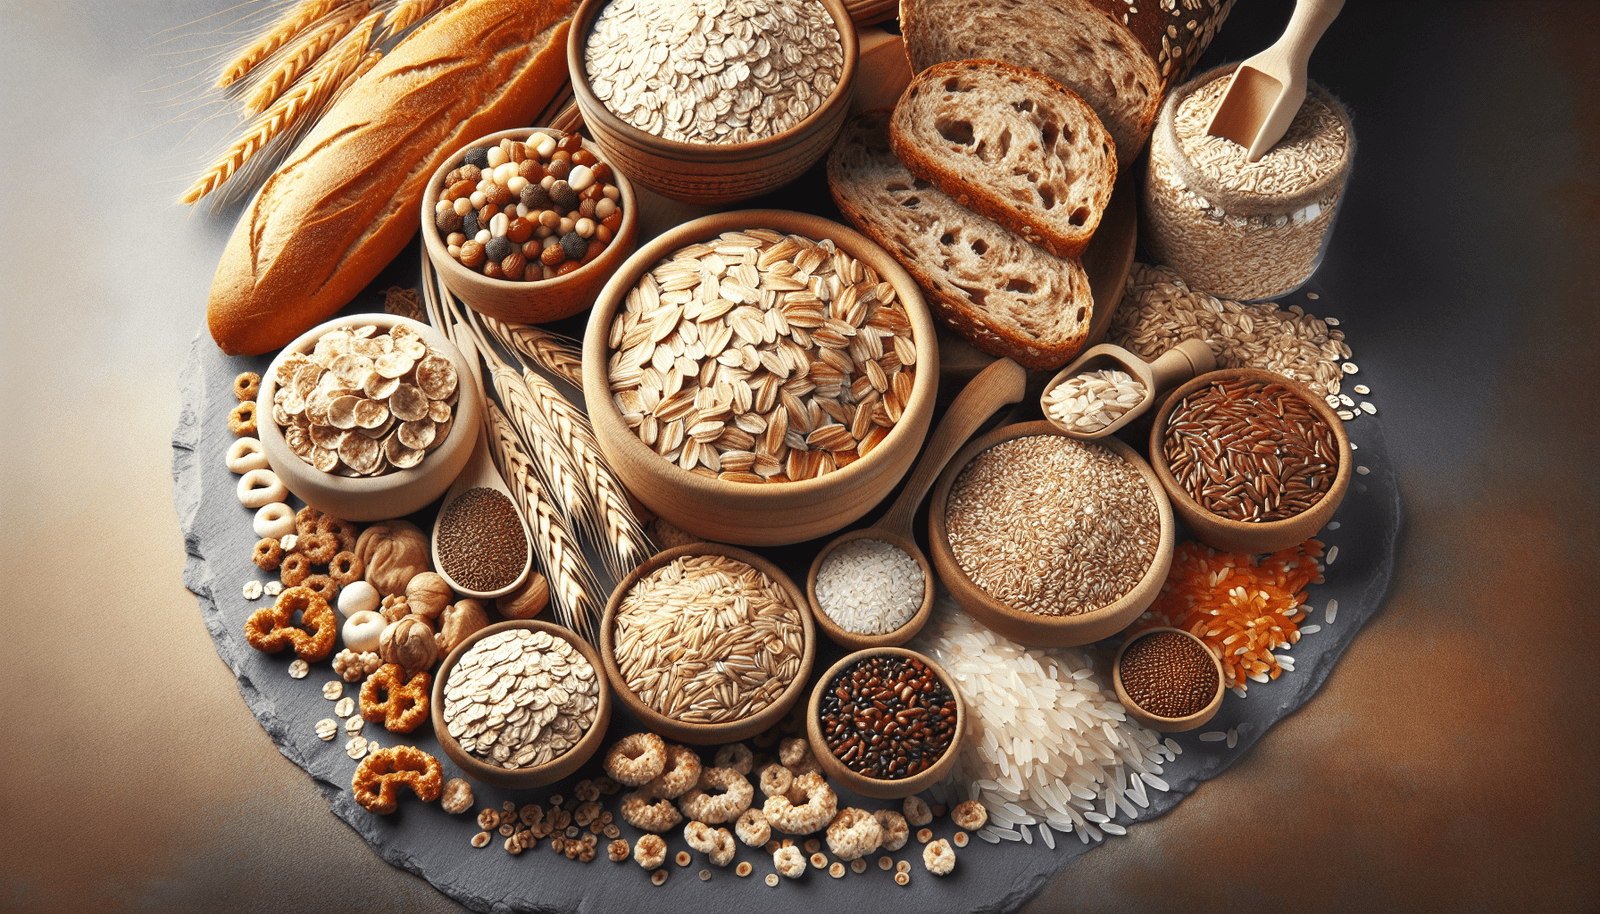 What Are The Best Ways To Incorporate More Whole Grains Into A Senior’s Diet?